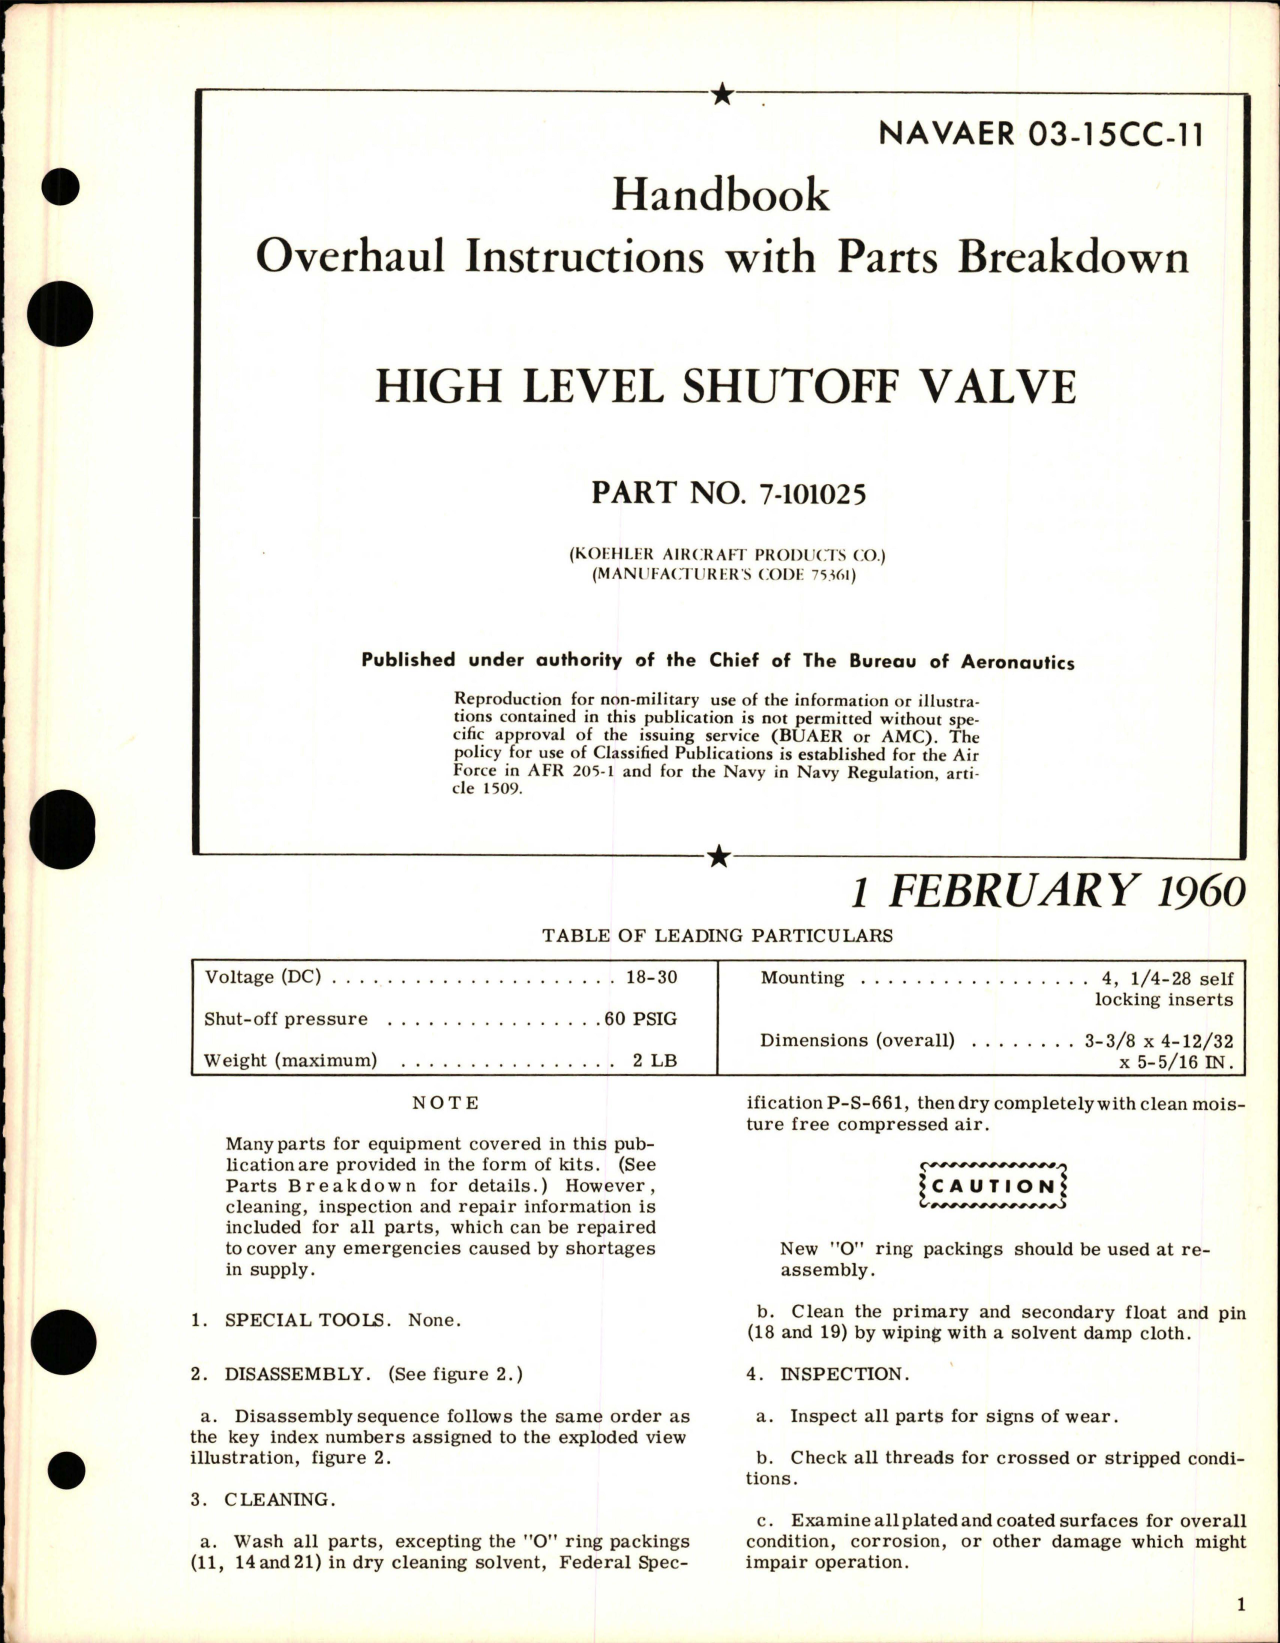 Sample page 1 from AirCorps Library document: Overhaul Instructions with Parts Breakdown for High Level Shutoff Valve - Part 7-101025